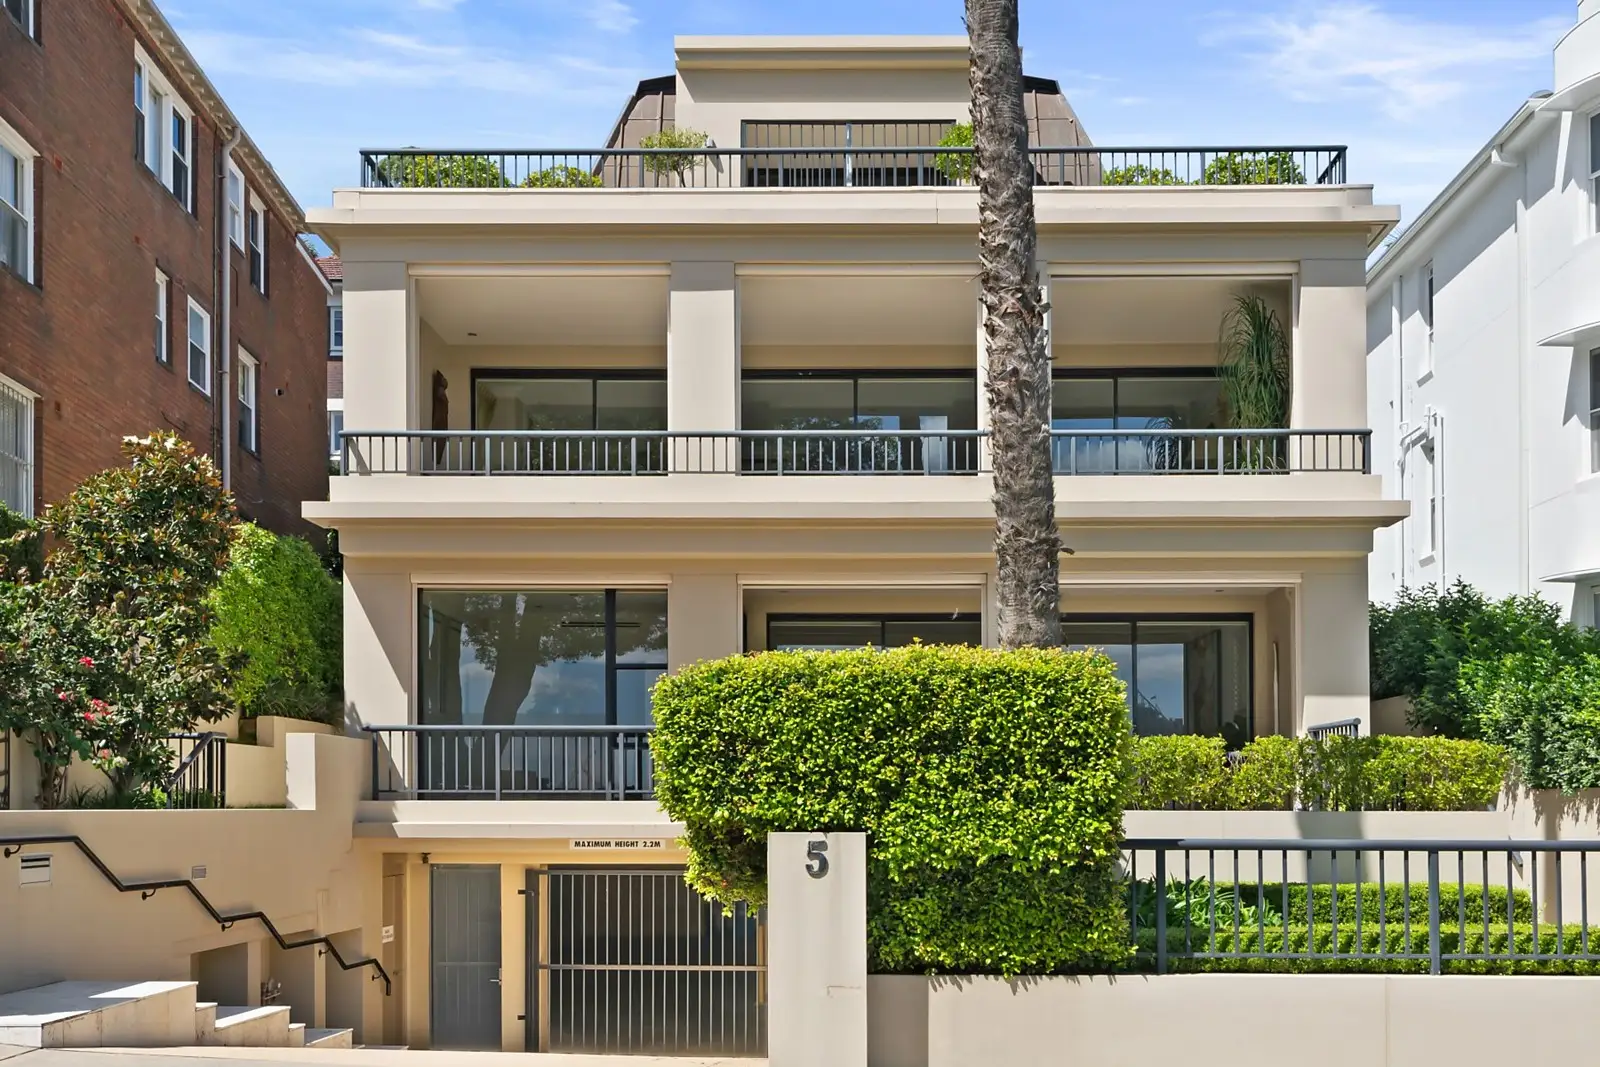 Photo #1: 1/5 Goomerah Crescent, Darling Point - Sold by Sydney Sotheby's International Realty